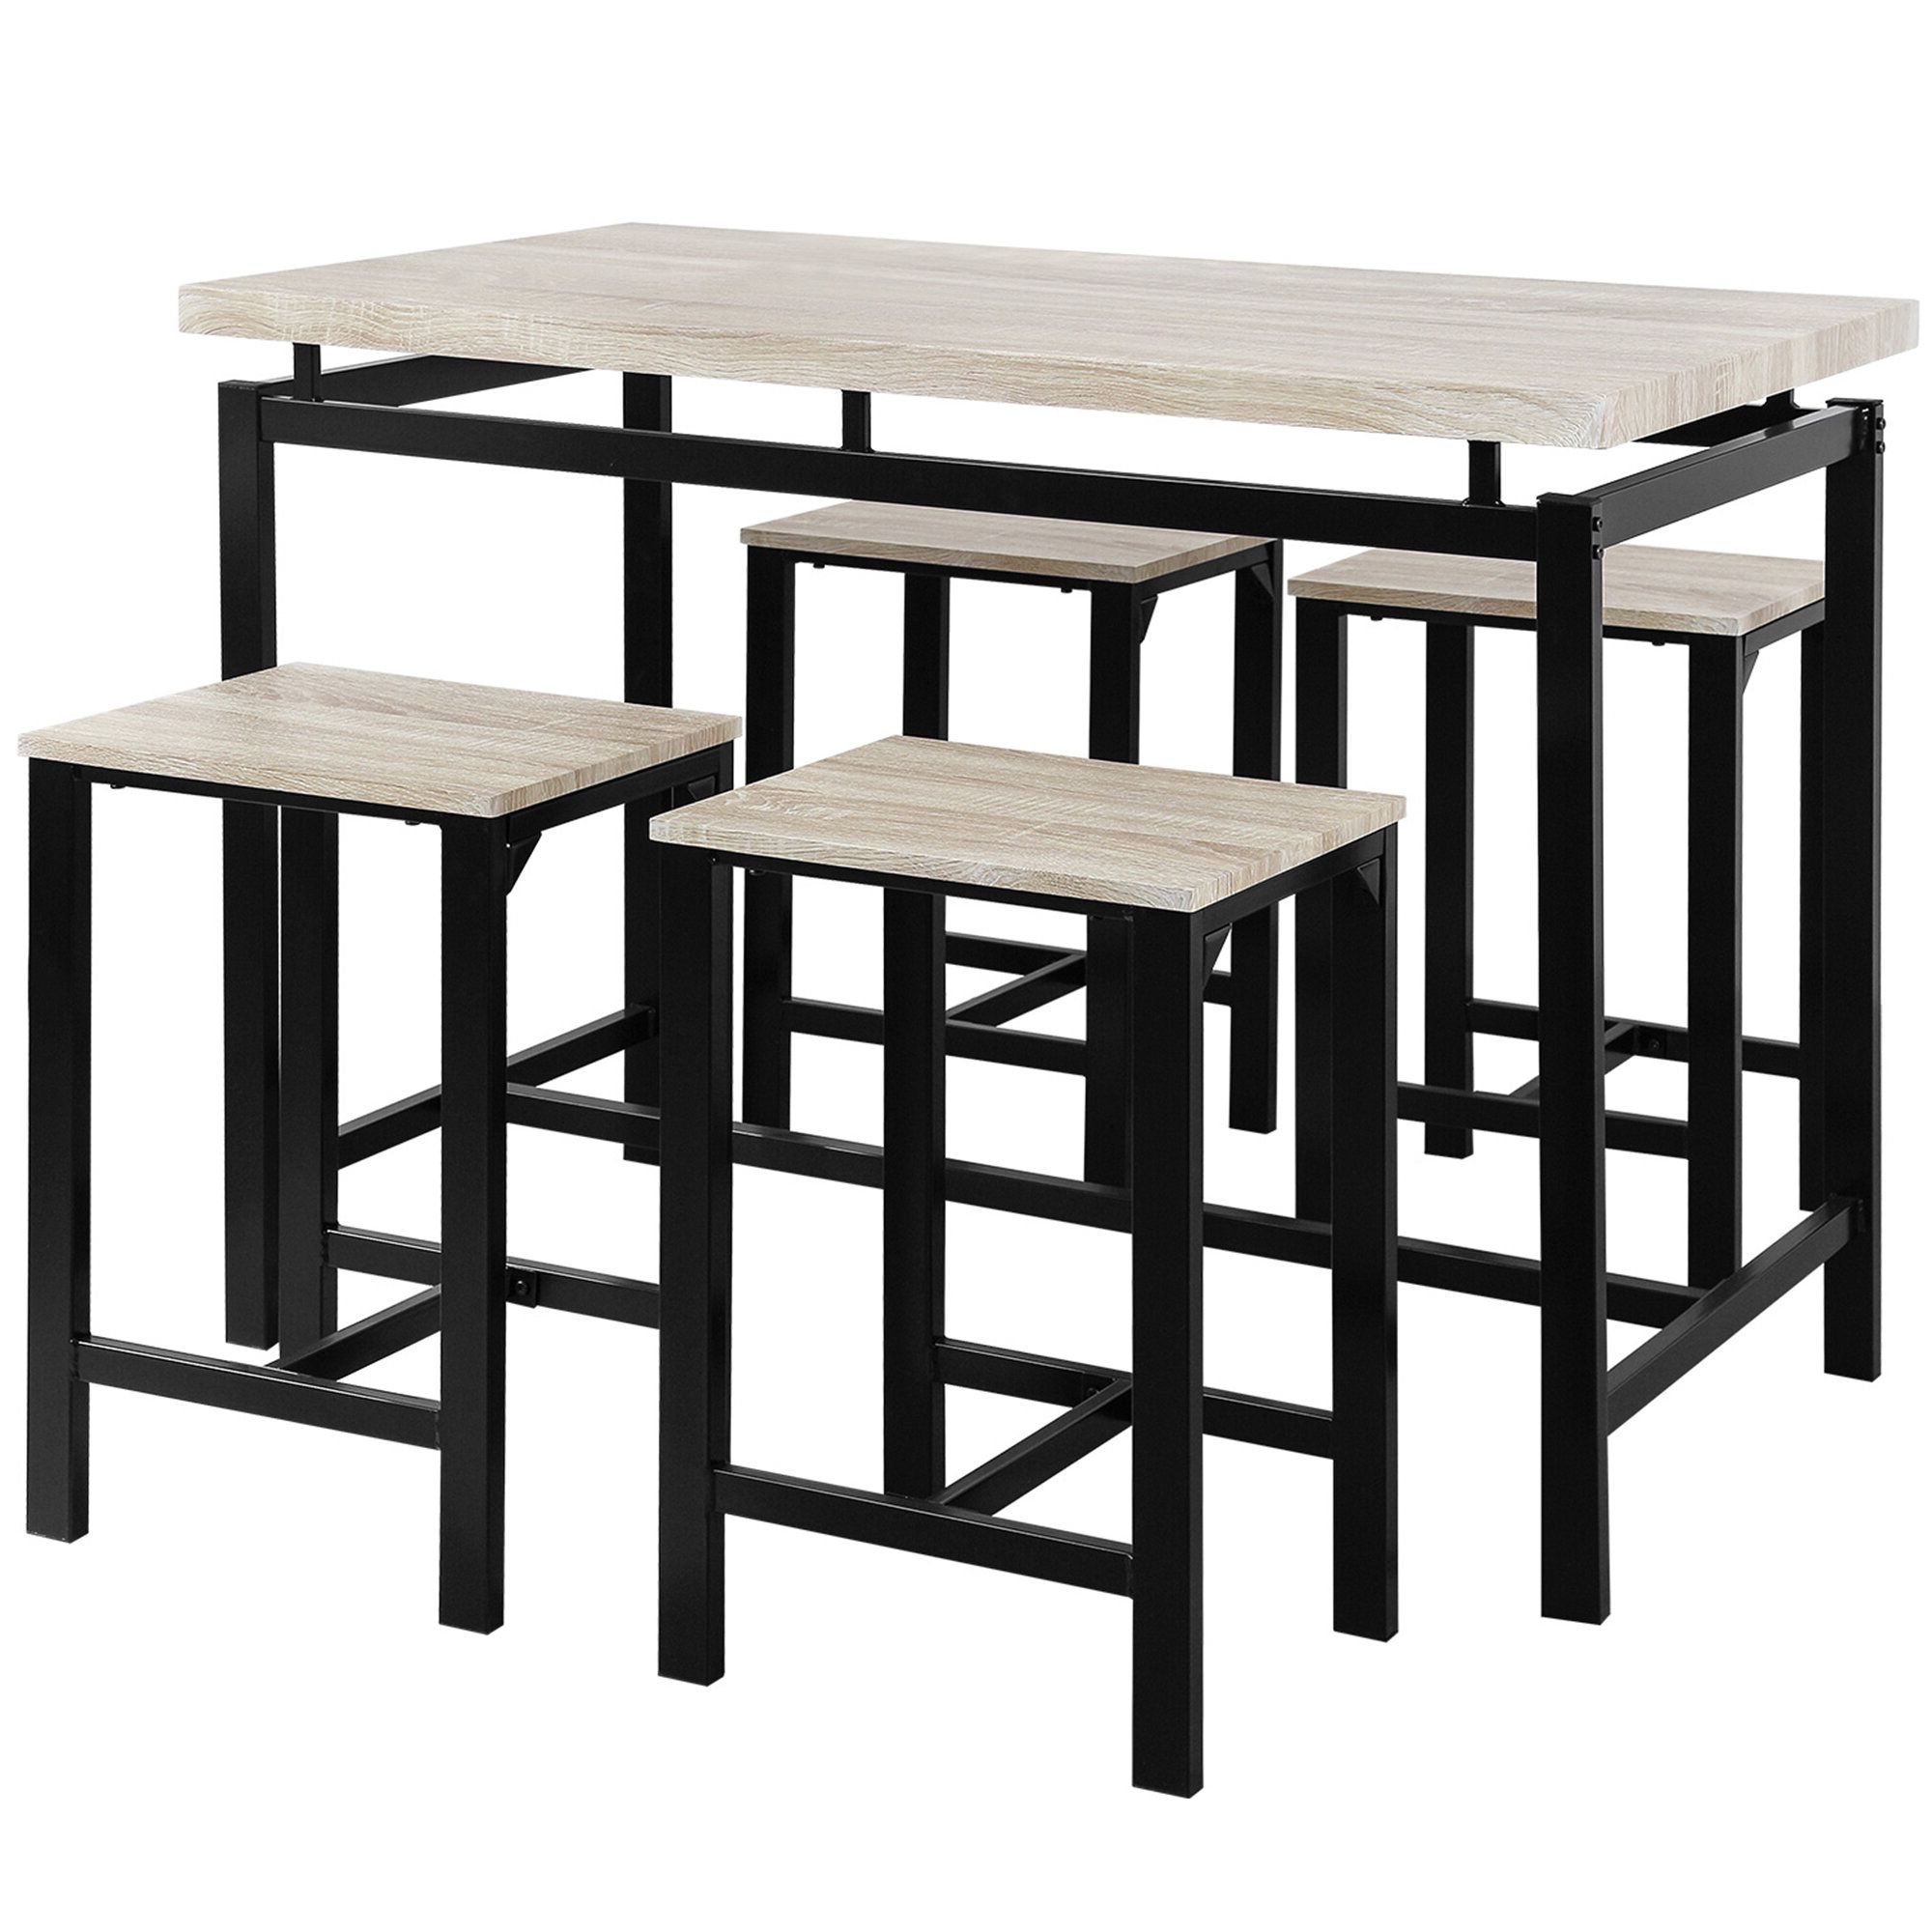 Most Recently Released Ansby Counter Heigh Dining Set Intended For Ansby Barrel Chairs (View 11 of 20)